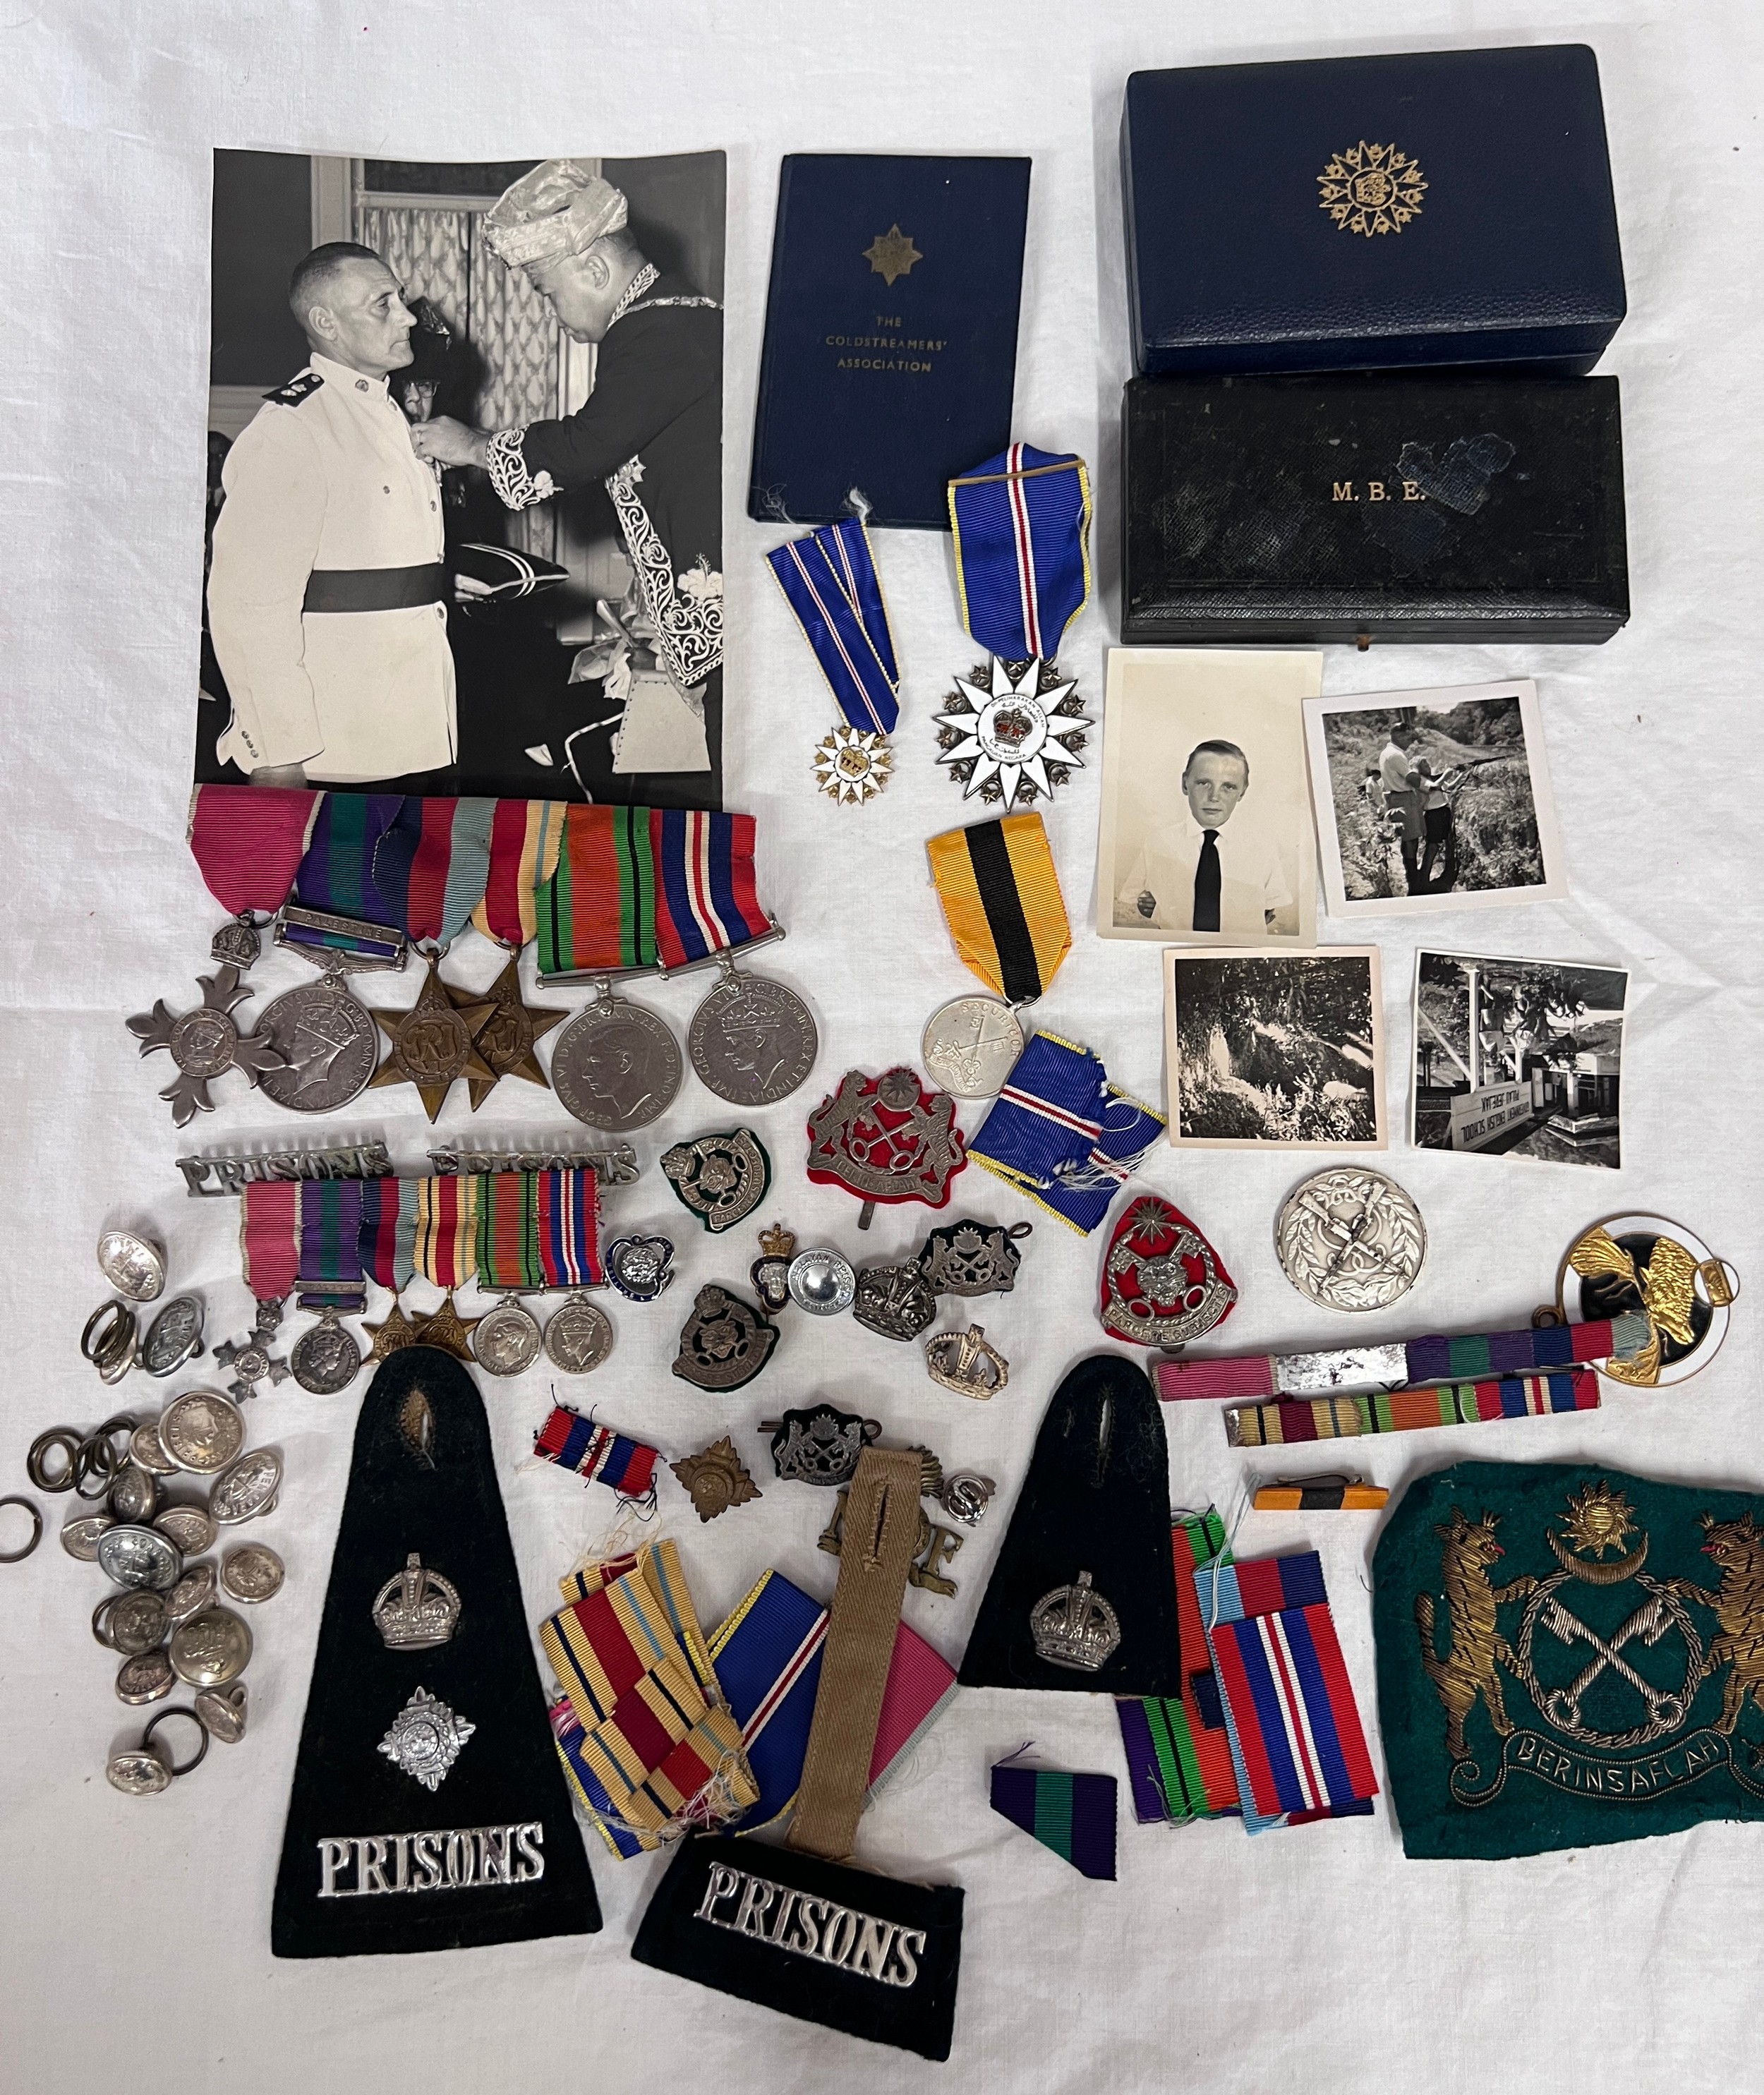 Harry Gilbert Shorters M. B. E., A.M.N. A good historical collection of medals and archive